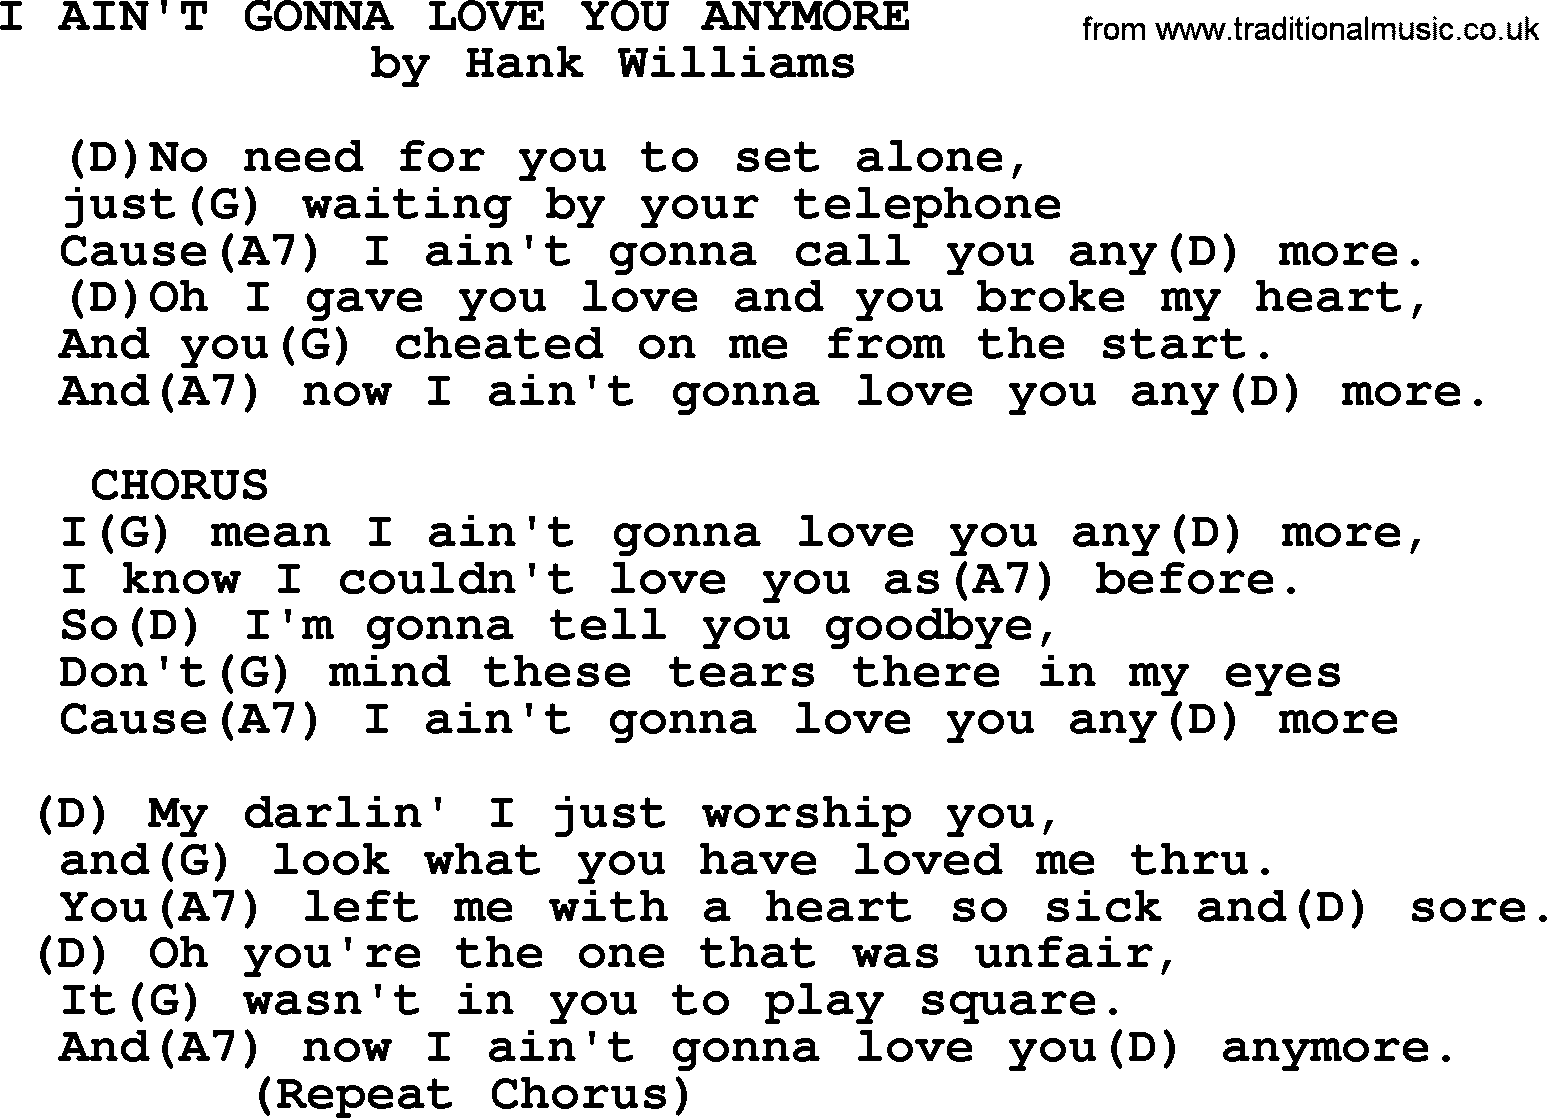 Hank Williams song I Ain't Gonna Love You Anymore, lyrics and chords